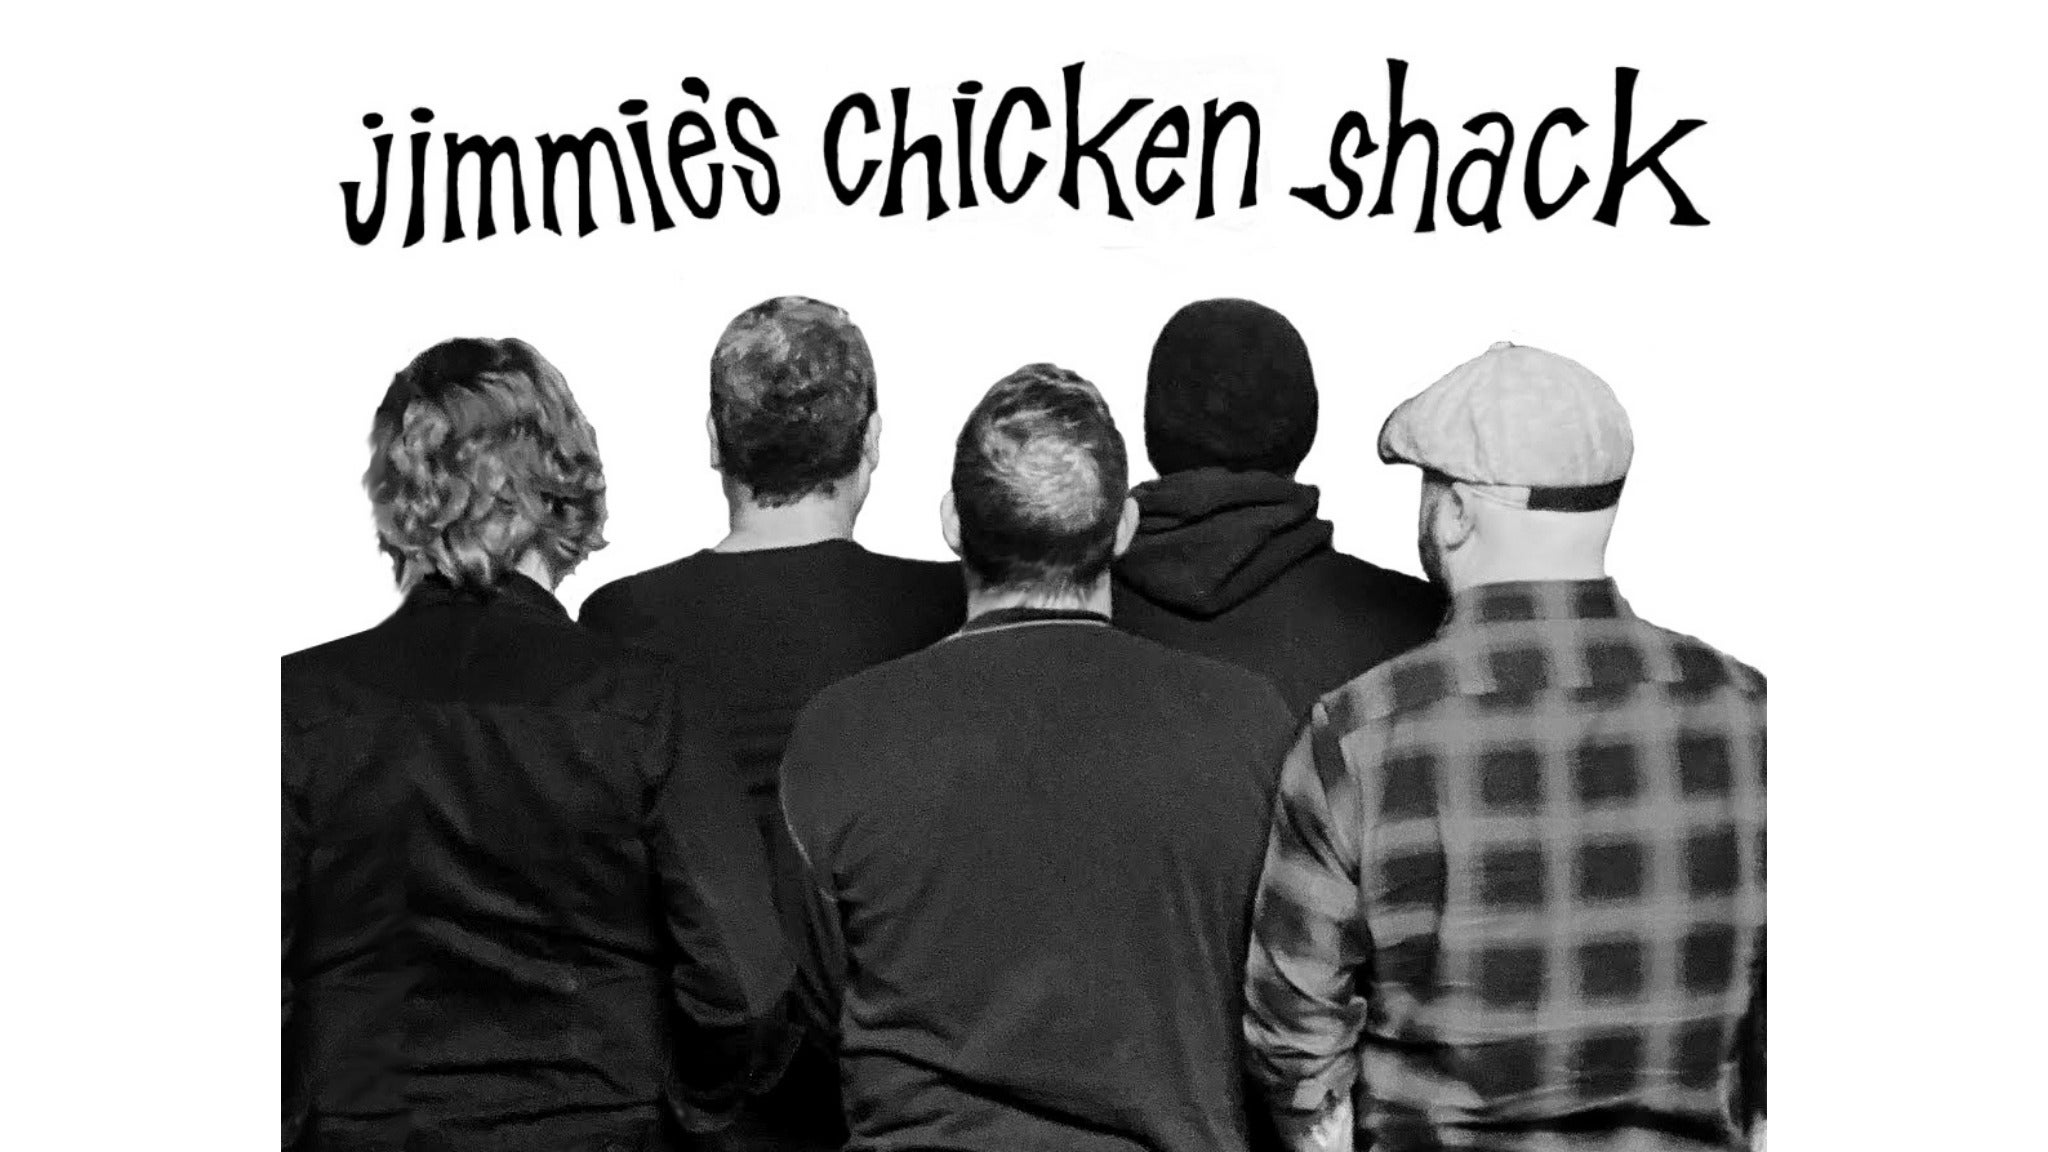 Image used with permission from Ticketmaster | Jimmies chicken shack tickets